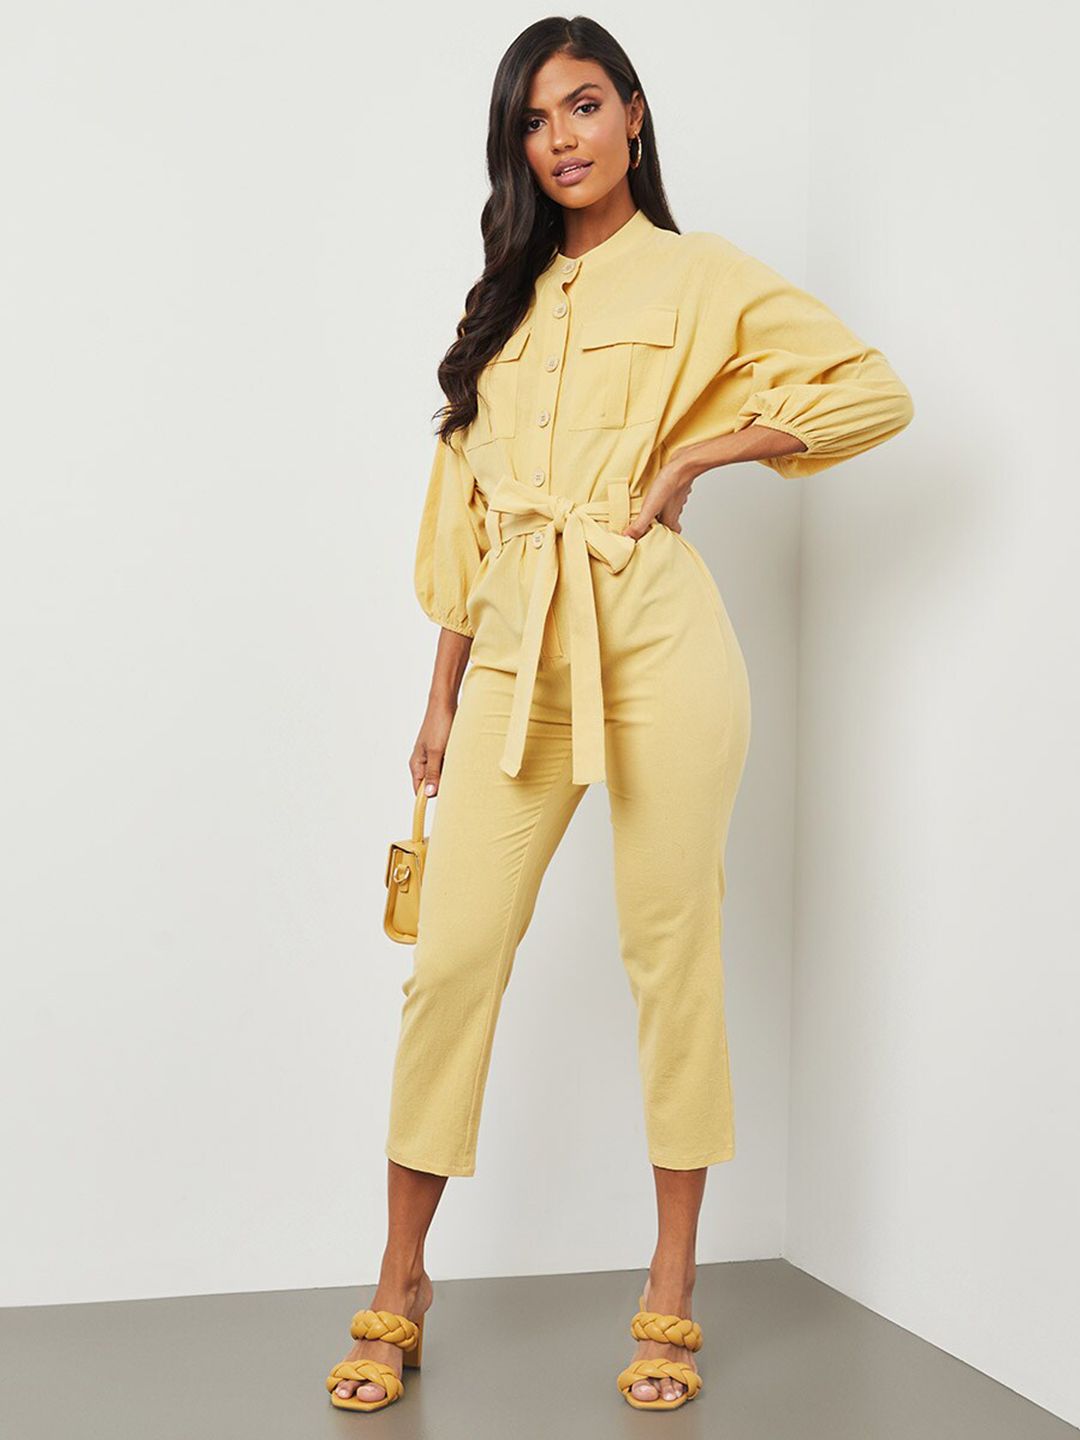 Styli Yellow Basic Jumpsuit Price in India